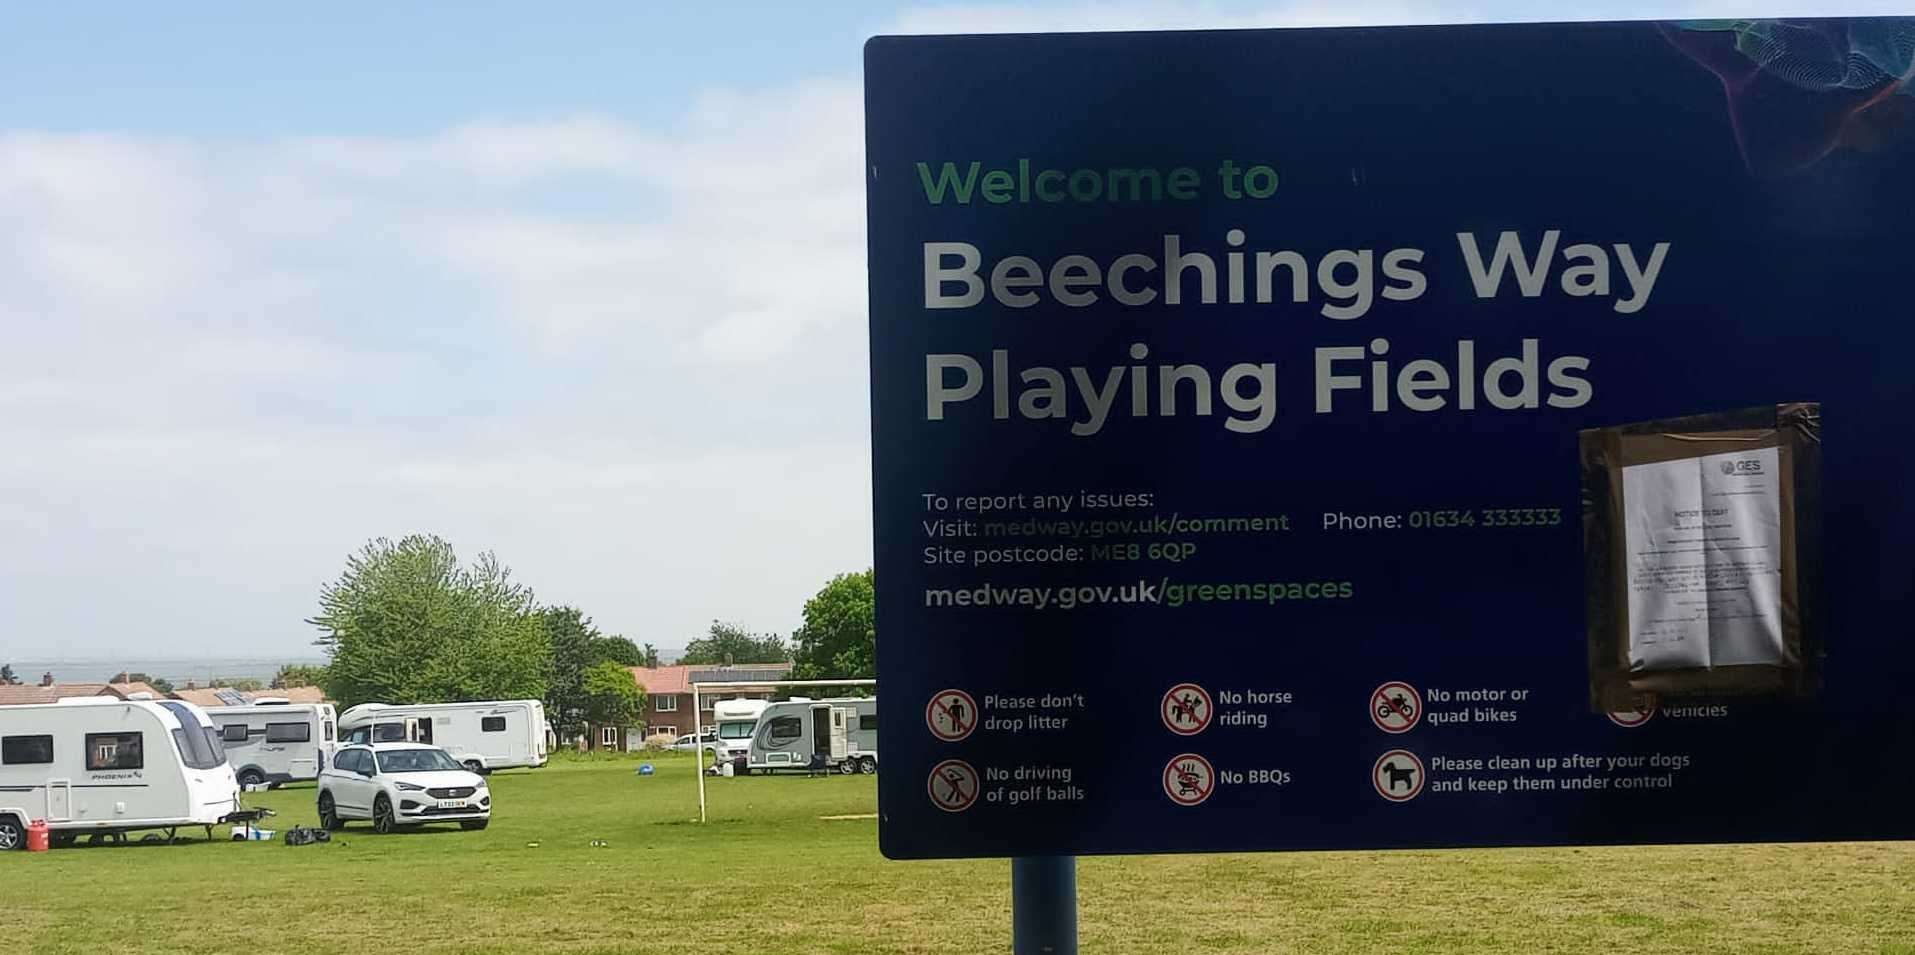 An unauthorised Traveller encampment has returned to Beechings Way Playing Fields in Twydall